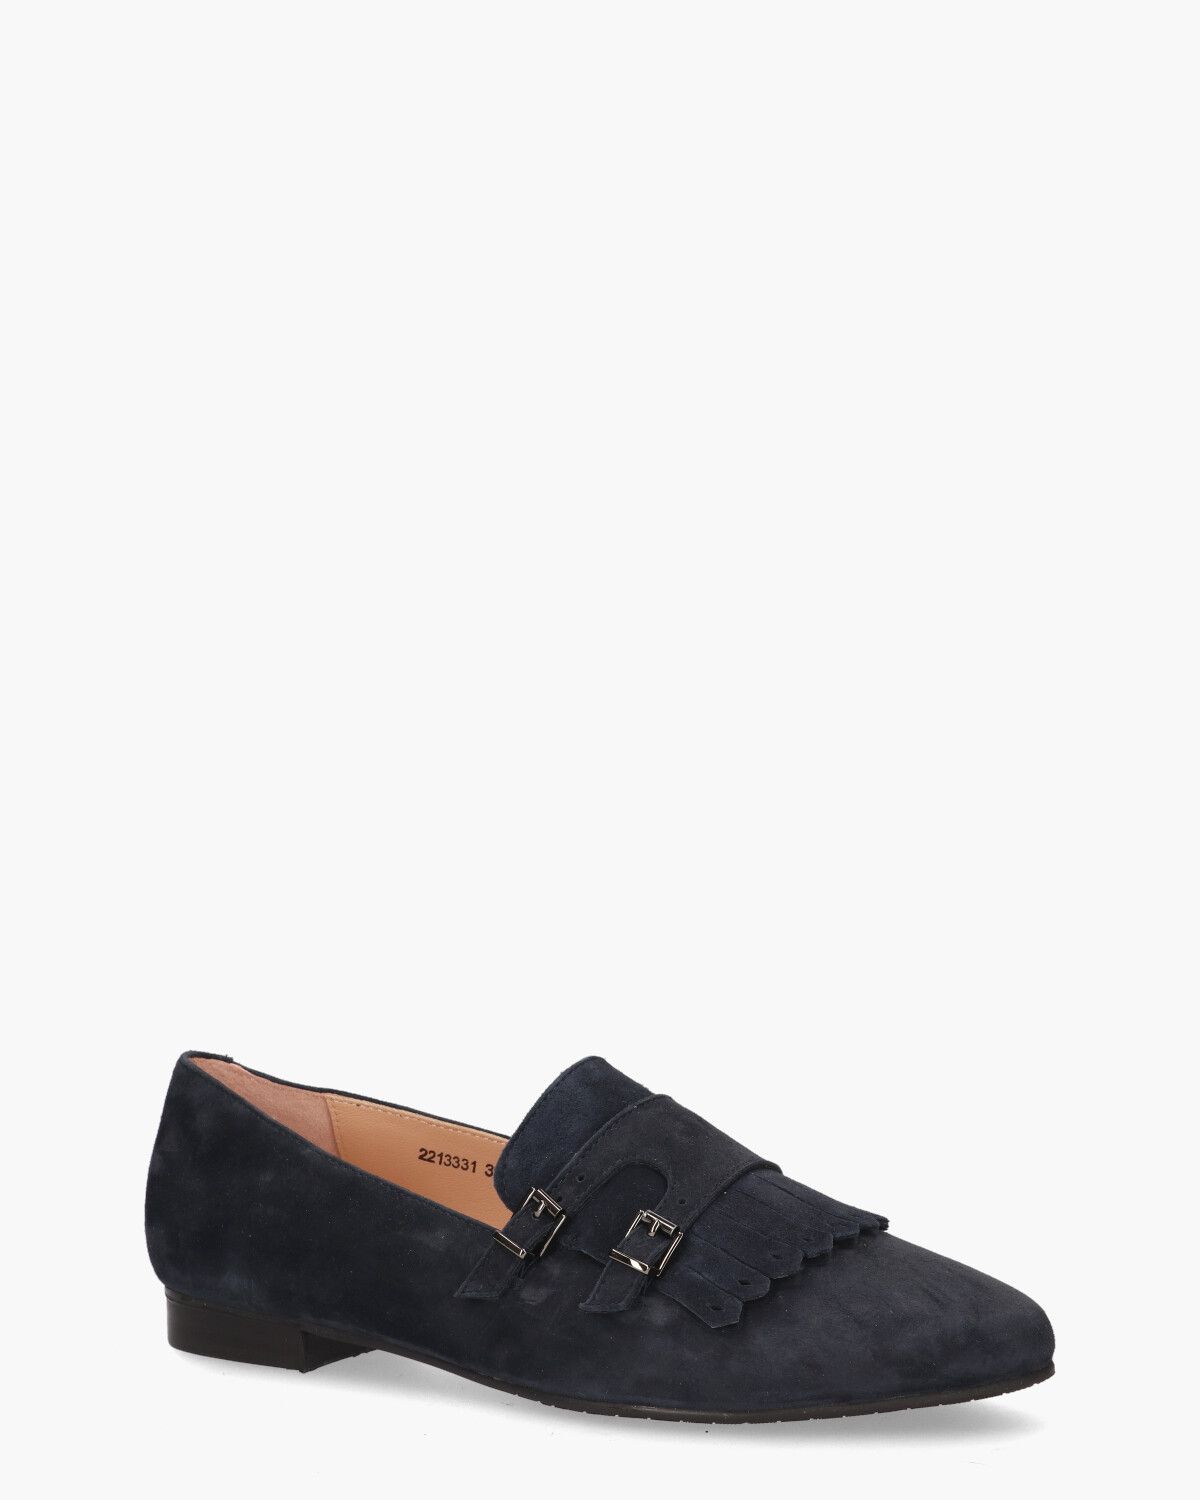 Olympe Donkerblauw Damesloafers